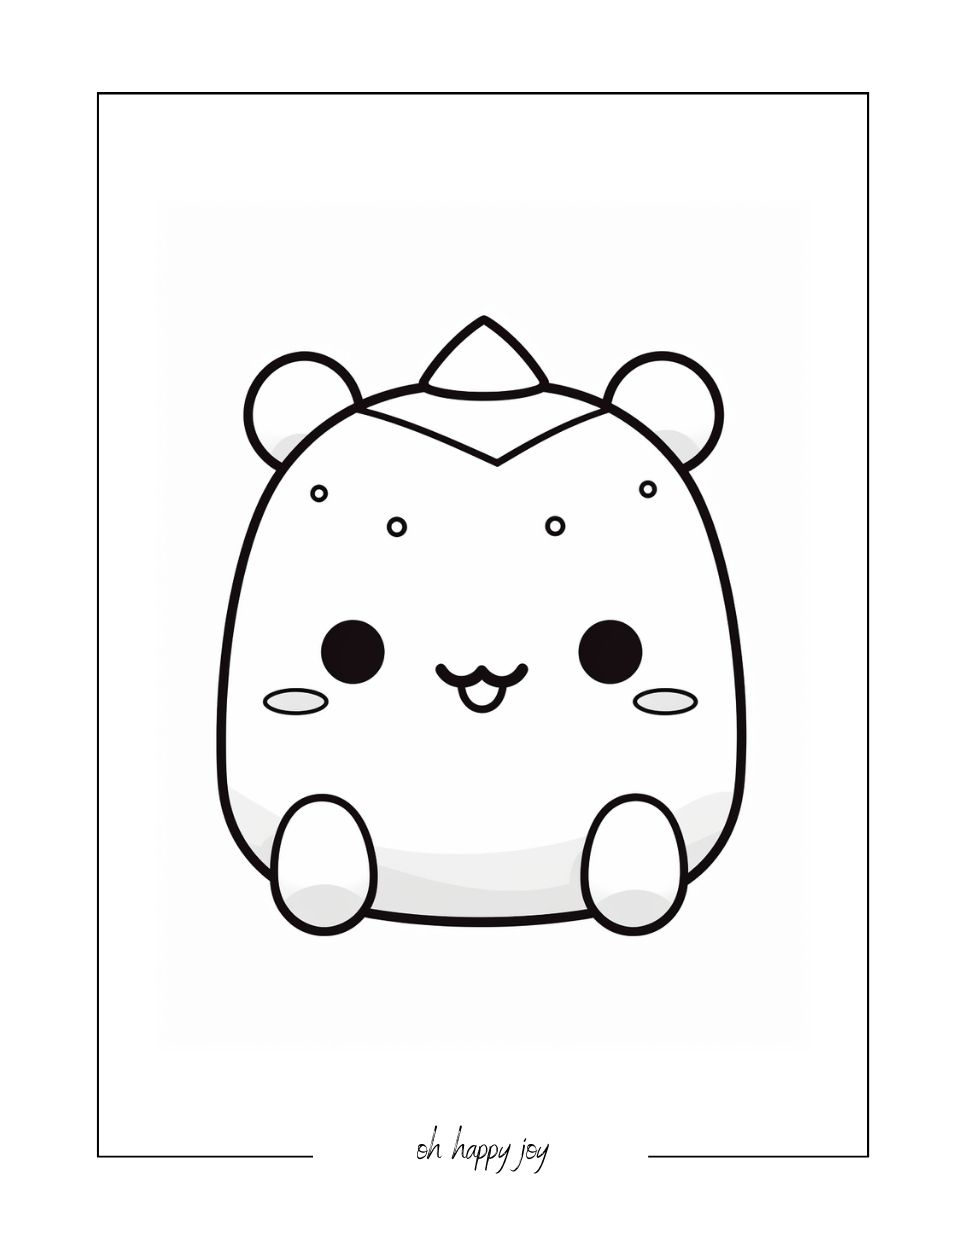 Little horned squishmallow printable